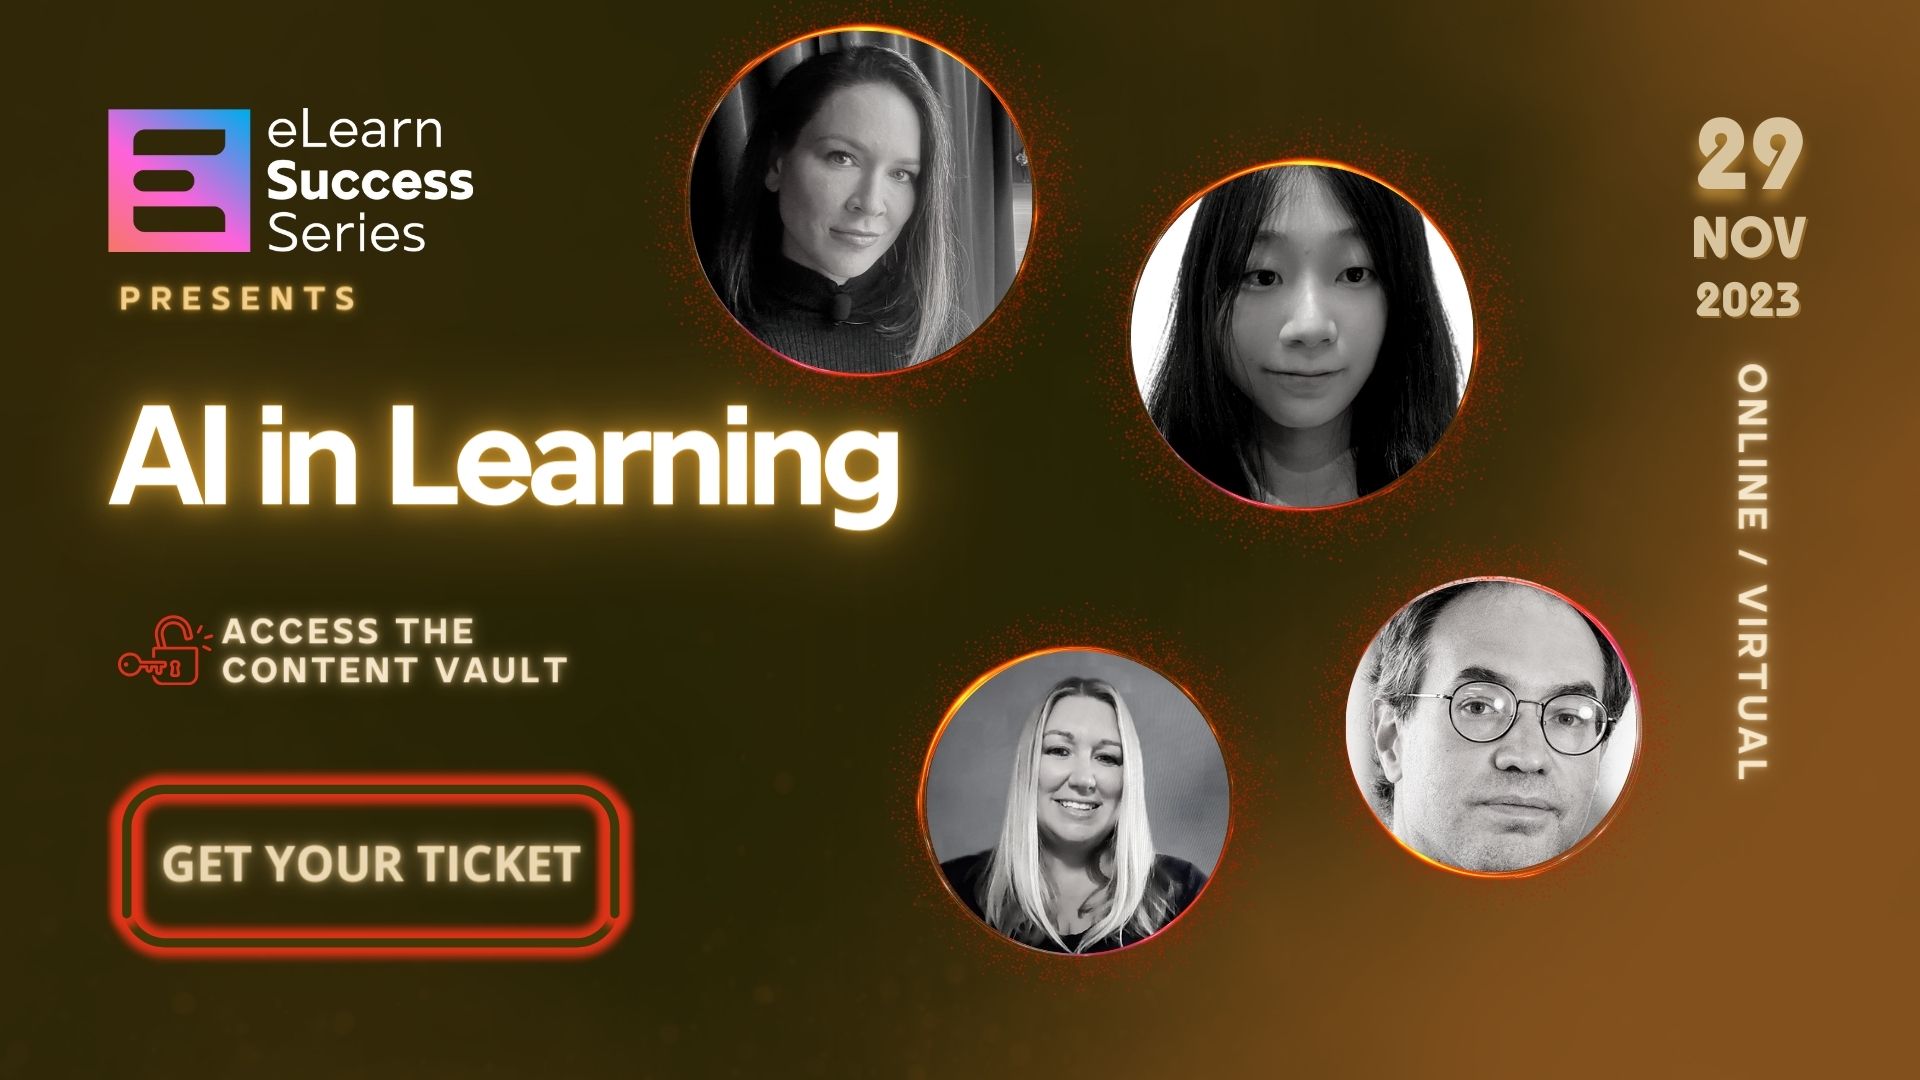 AI in Learning — Everything You Need To Know For the FINAL, NOVEMBER 29 Session